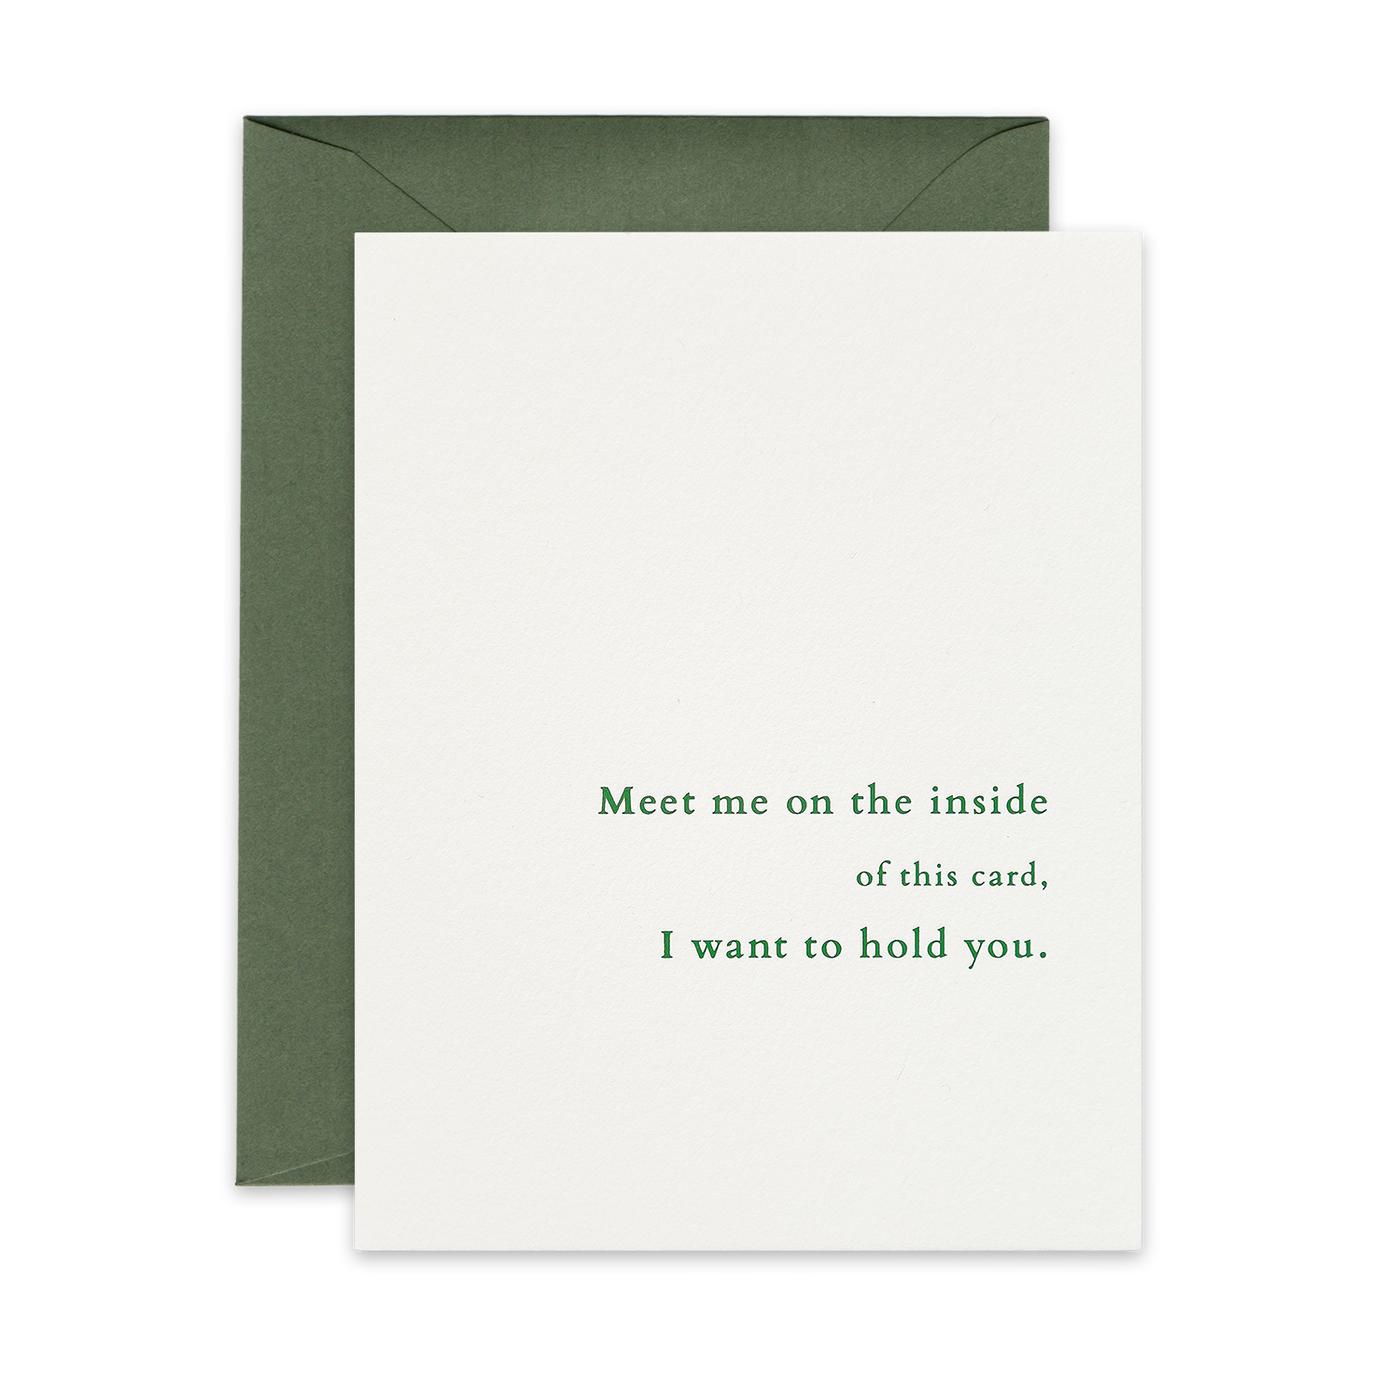 Green foil letterpress greeting card by beknown. Meet me on the inside of this card, I want to fold you.